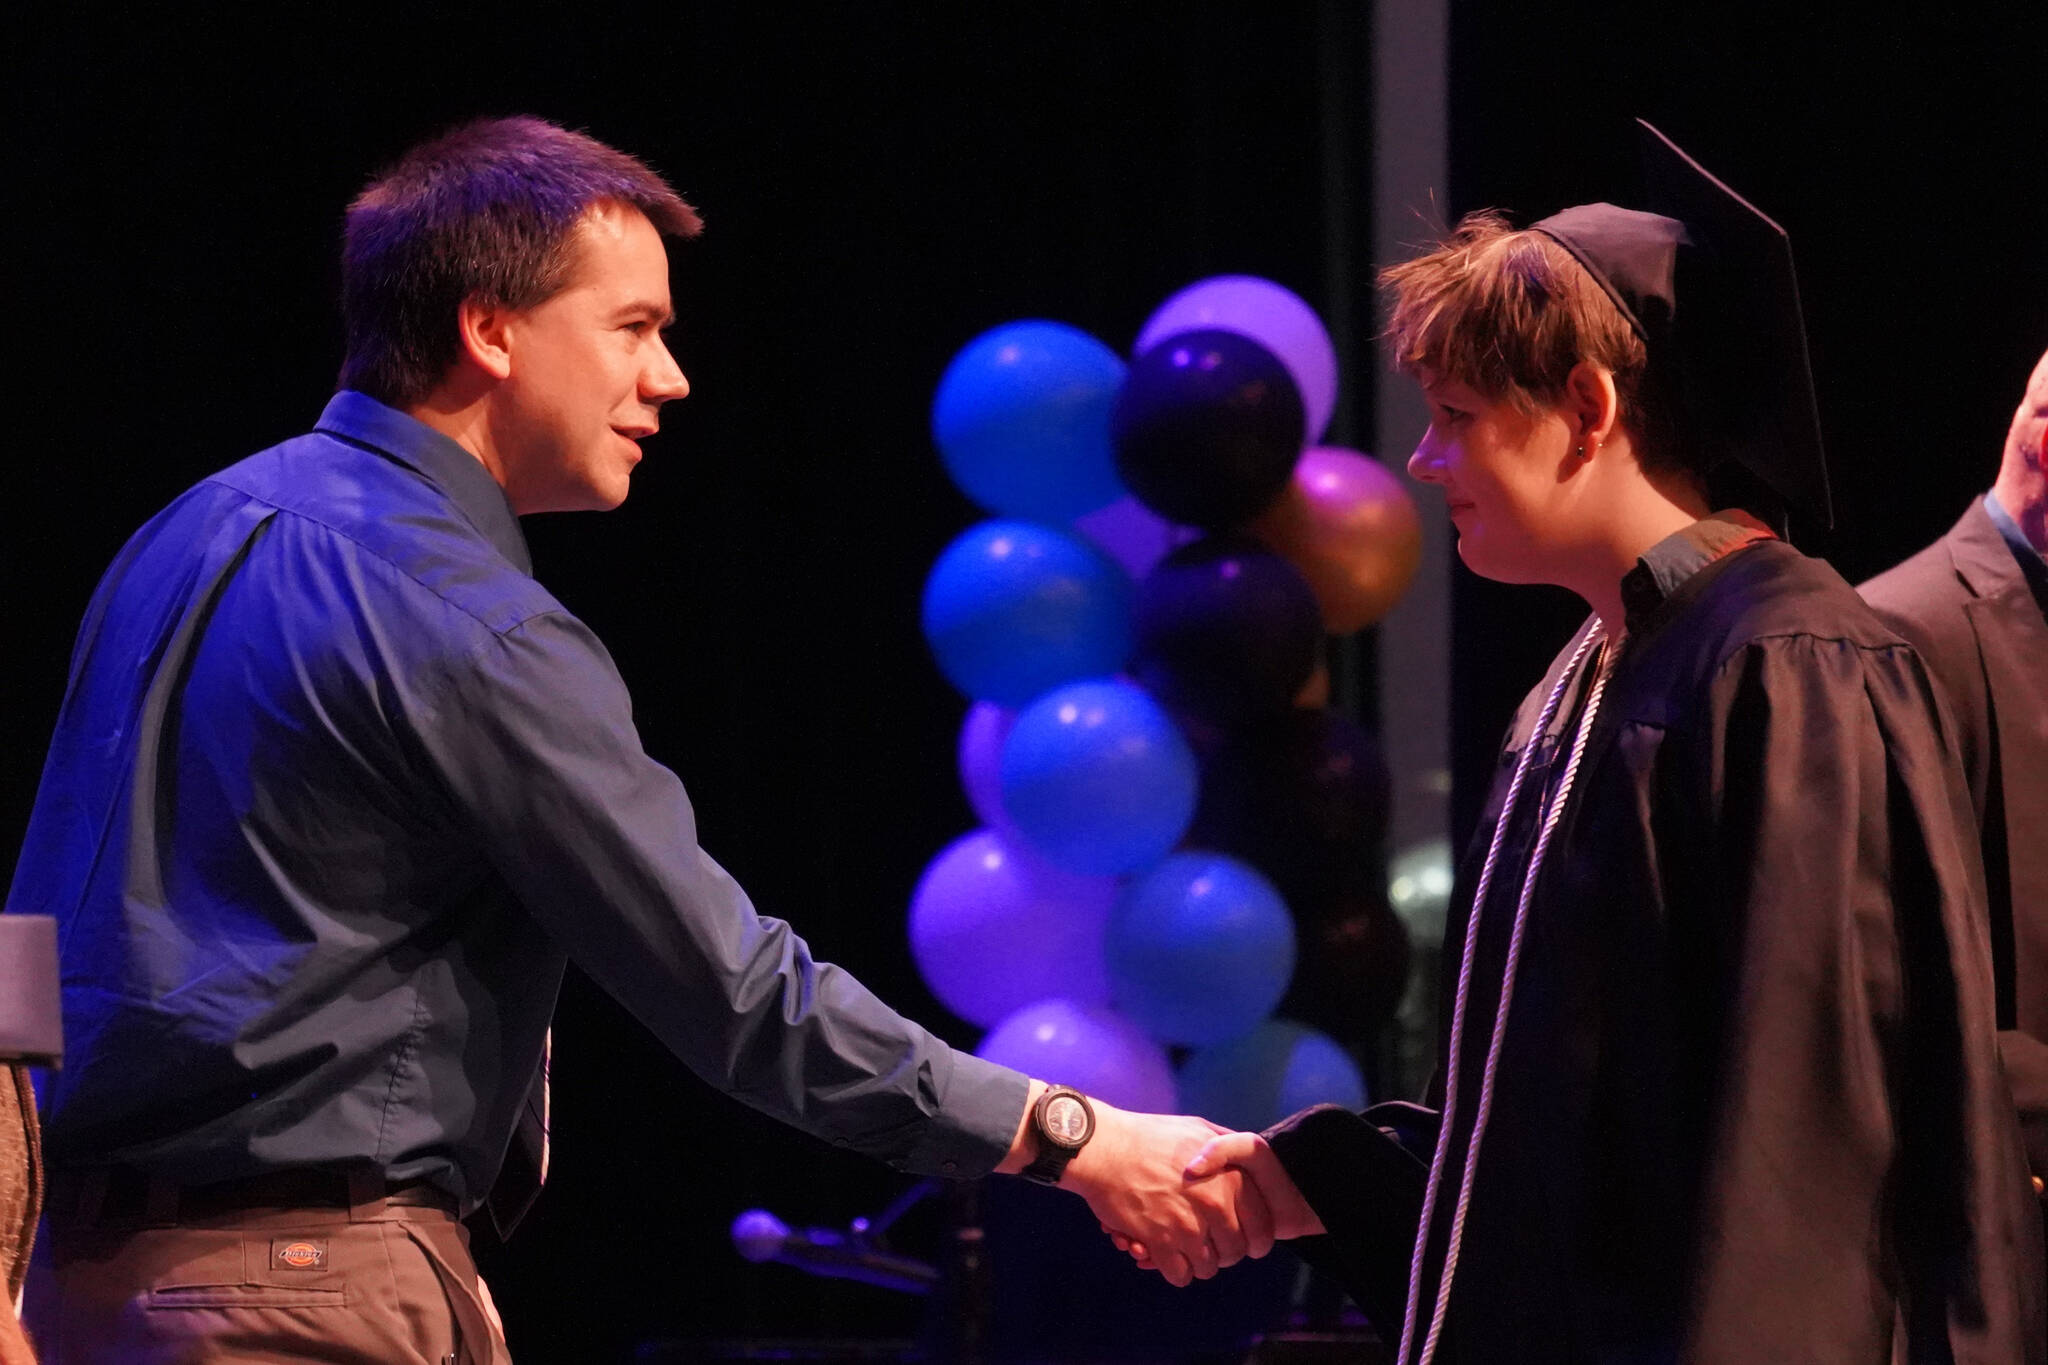 Connections Homeschool students take the stage to receive their diplomas during the Connections Homeschool graduation ceremony on Thursday, May 18, 2023, at Soldotna High School in Soldotna, Alaska. (Jake Dye/Peninsula Clarion)